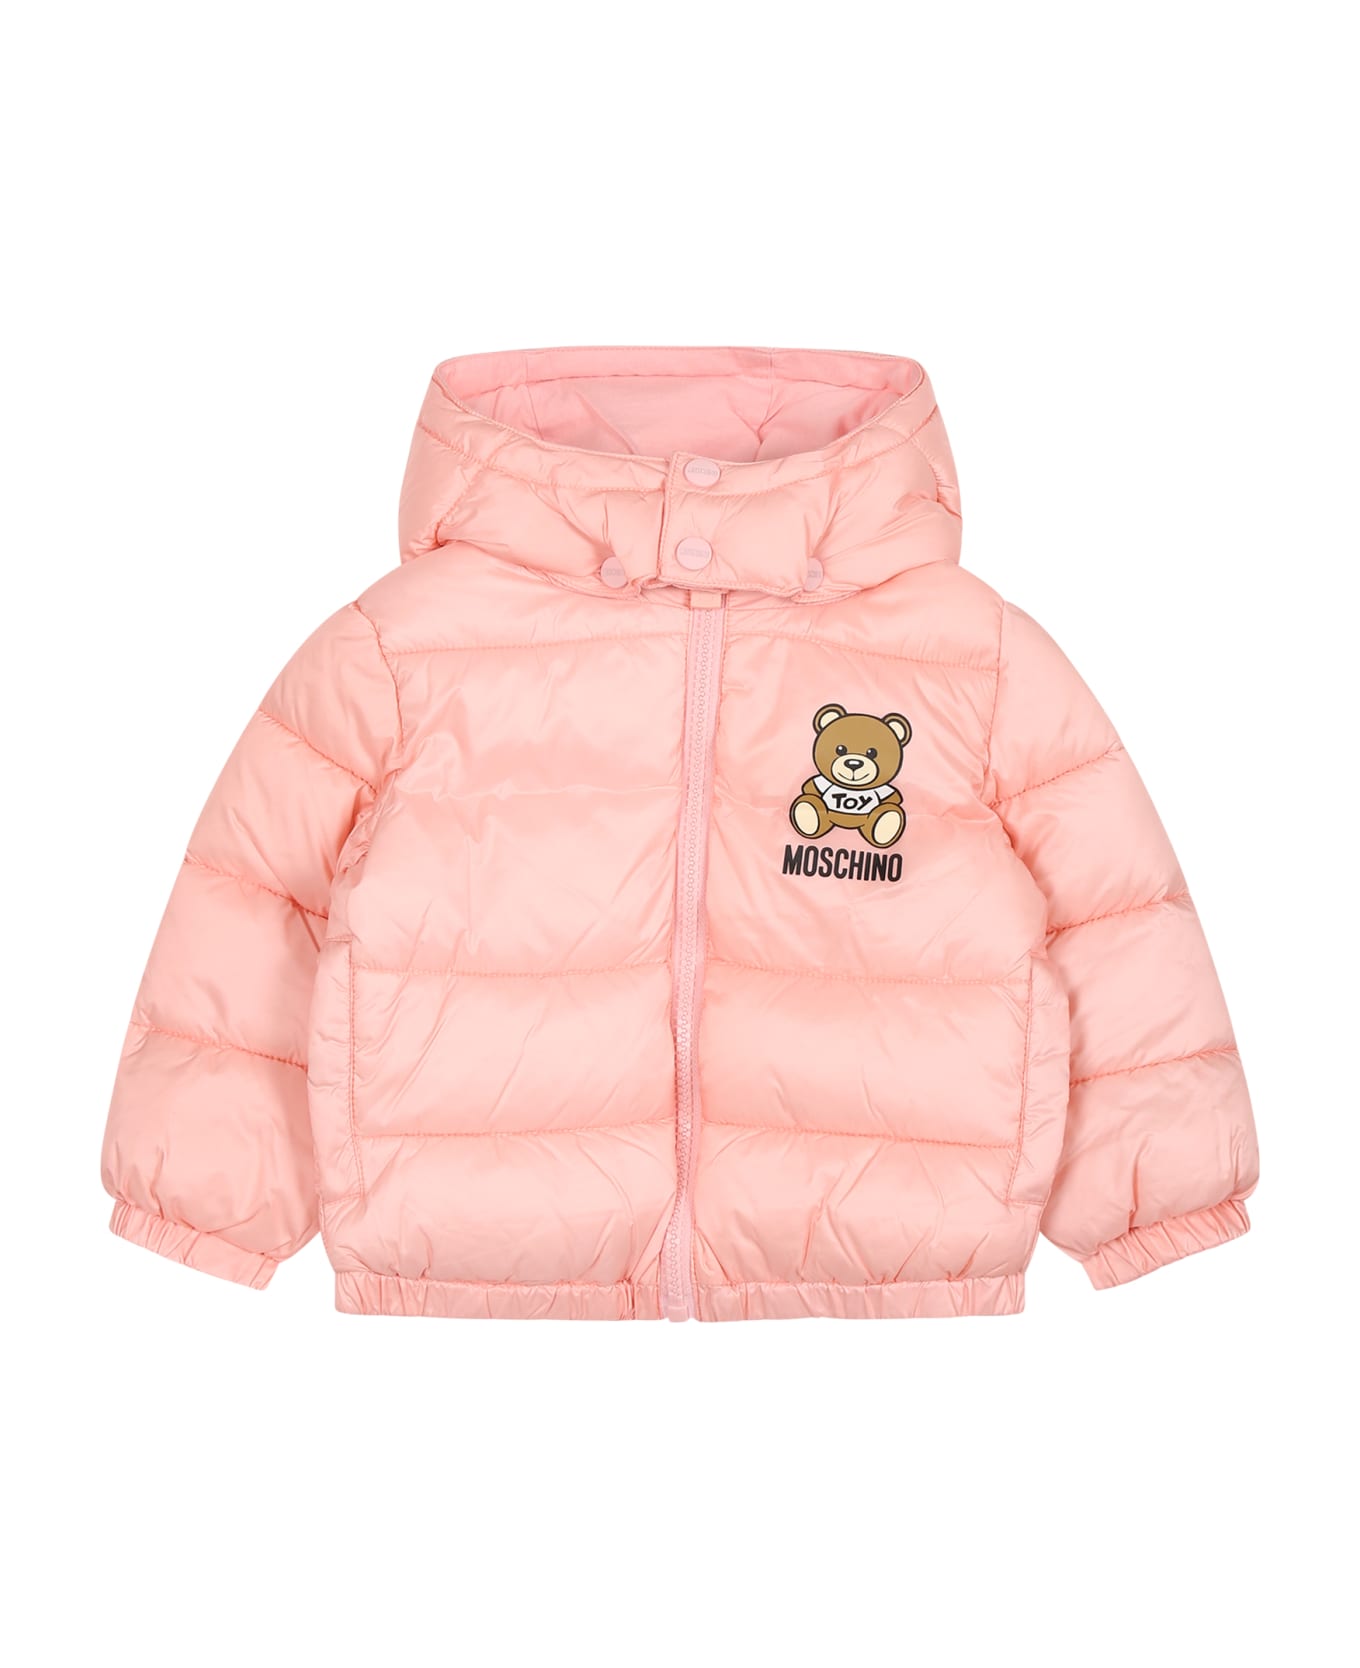 Moschino Pink Down Jacket For Baby Girl With Teddy Bear And Logo - Pink コート＆ジャケット